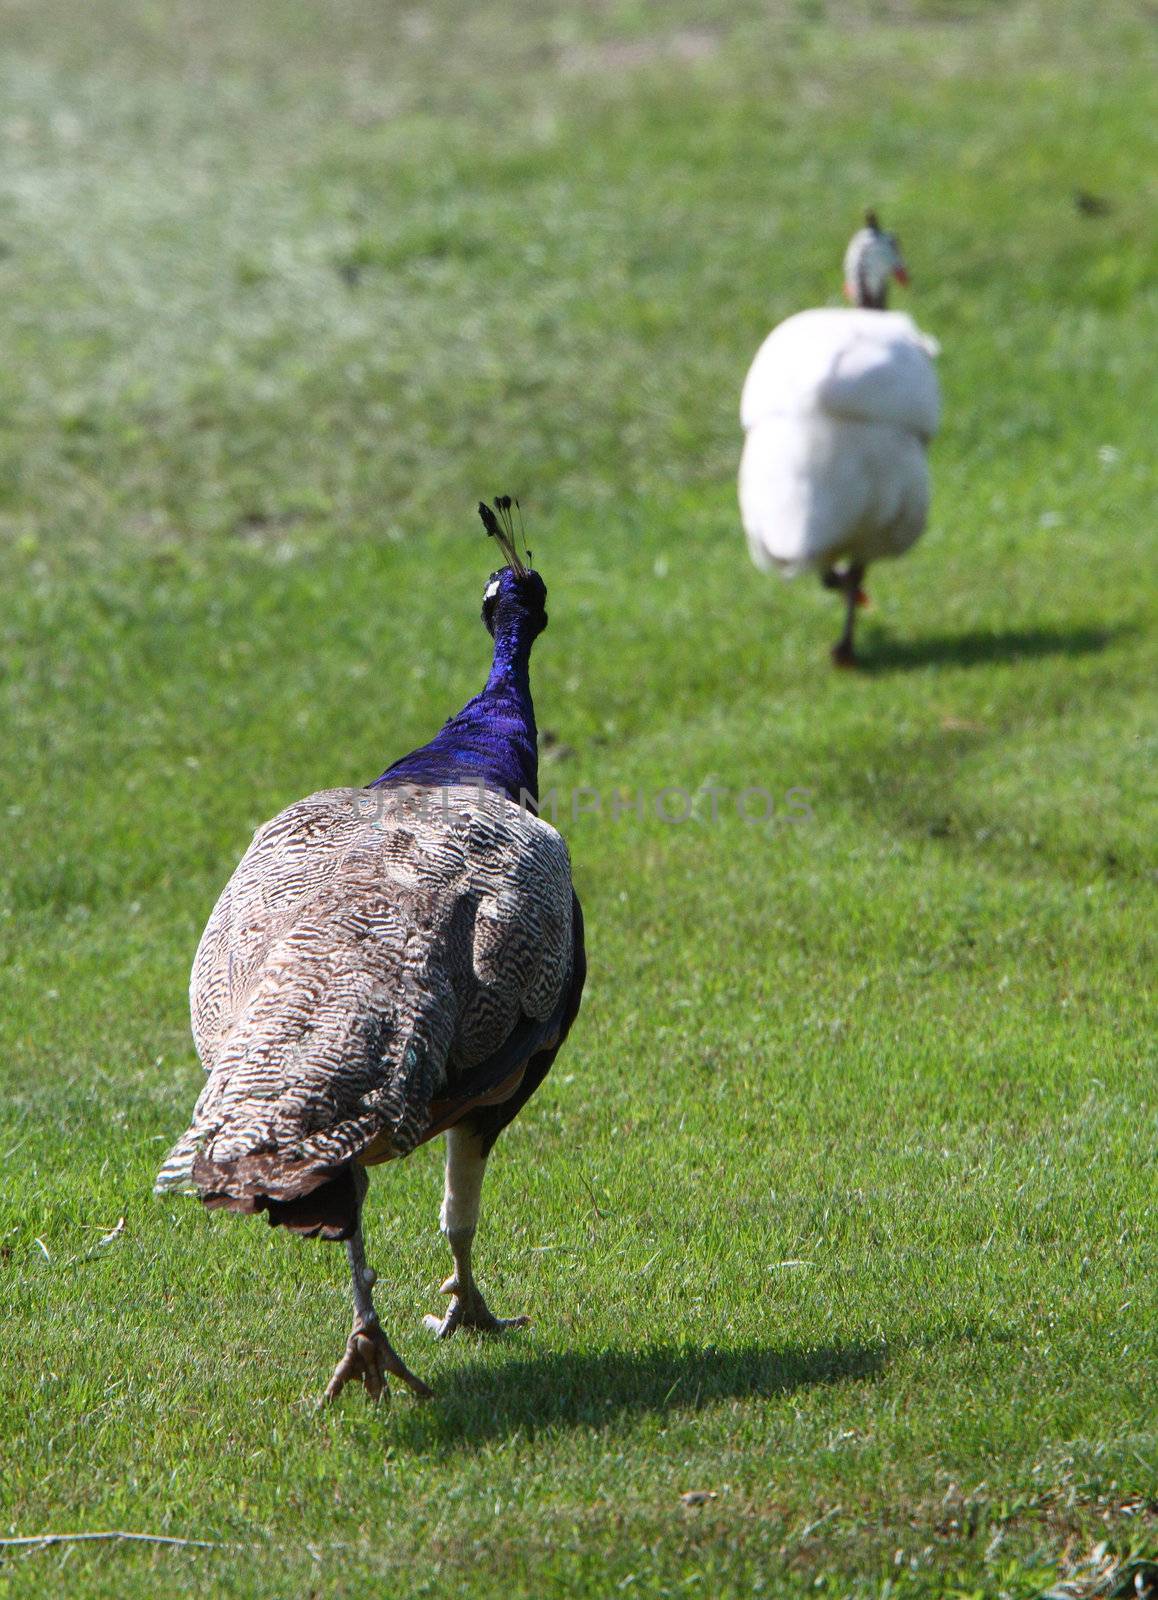 Peacock and Guinea Fowl in Saskatchewan by pictureguy